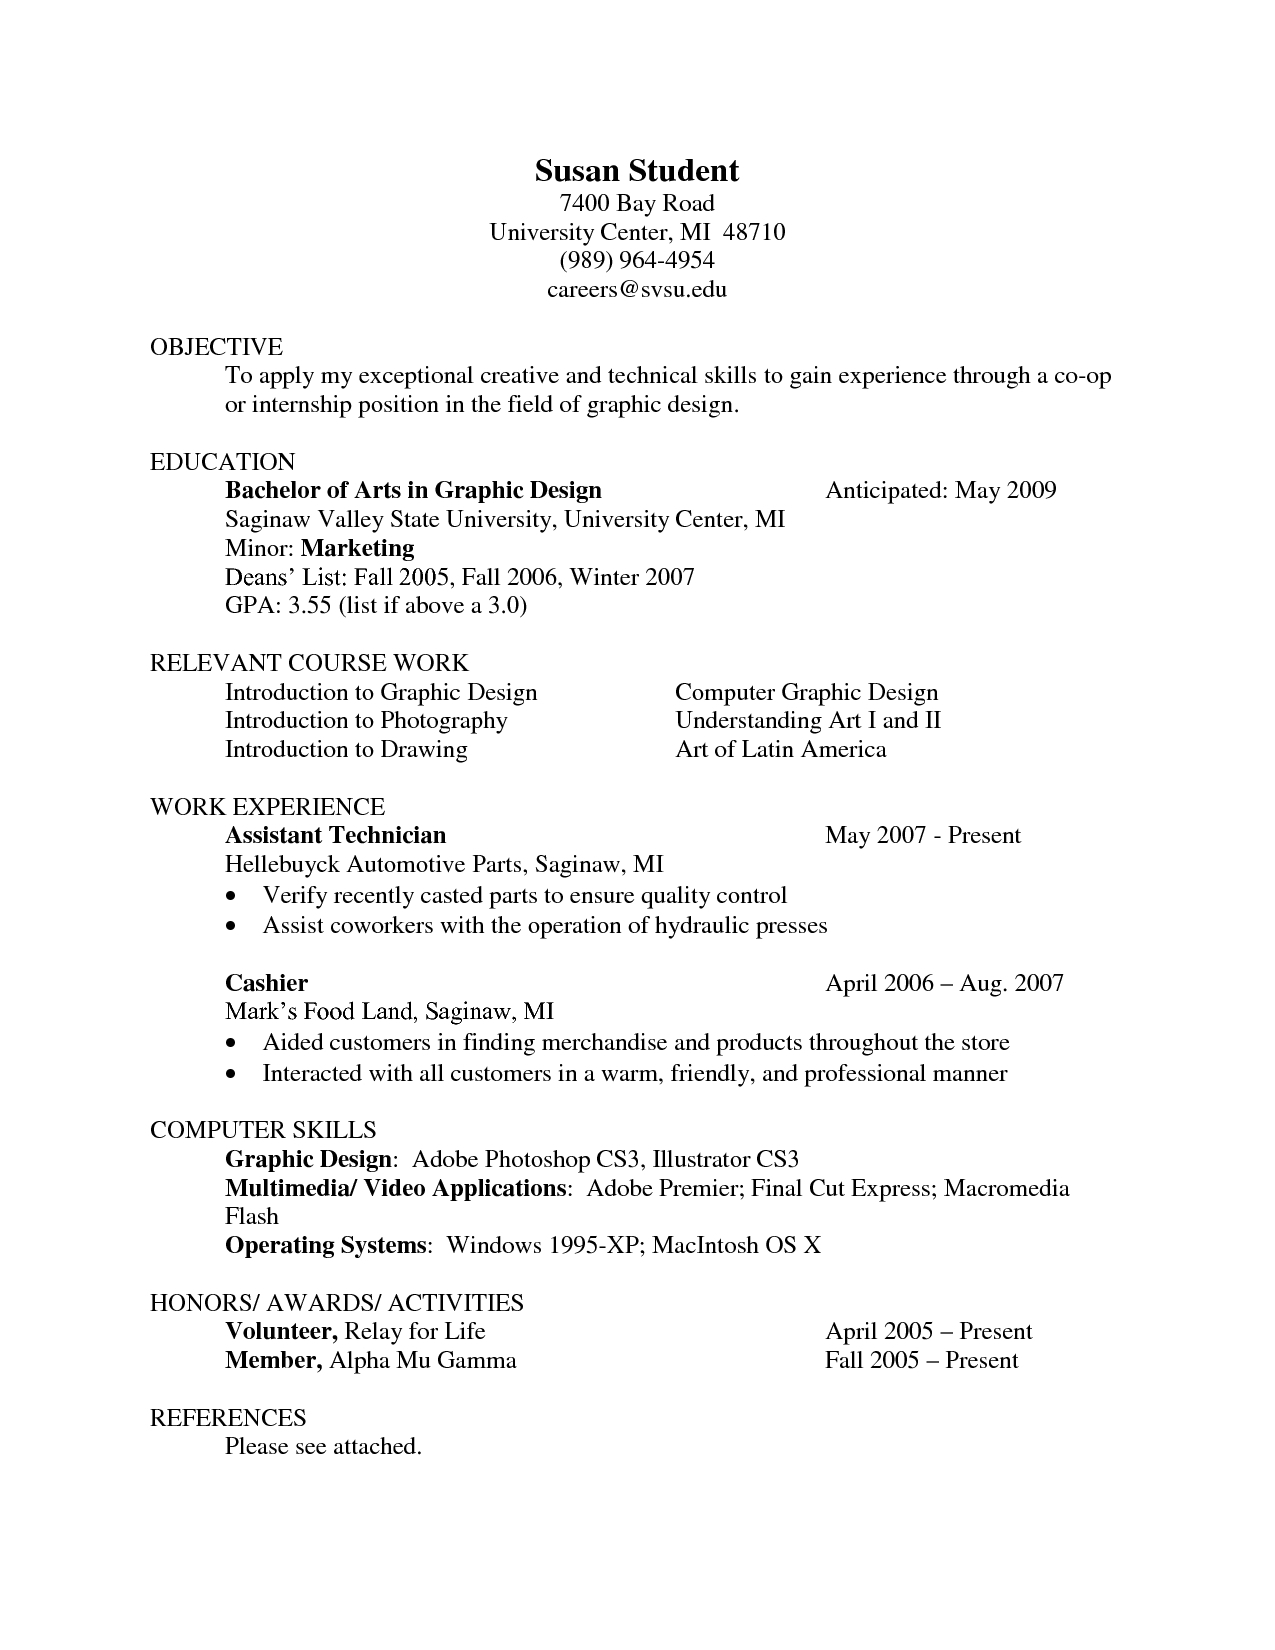 References For Resume Resume References Format References Resume Format Resume For Study